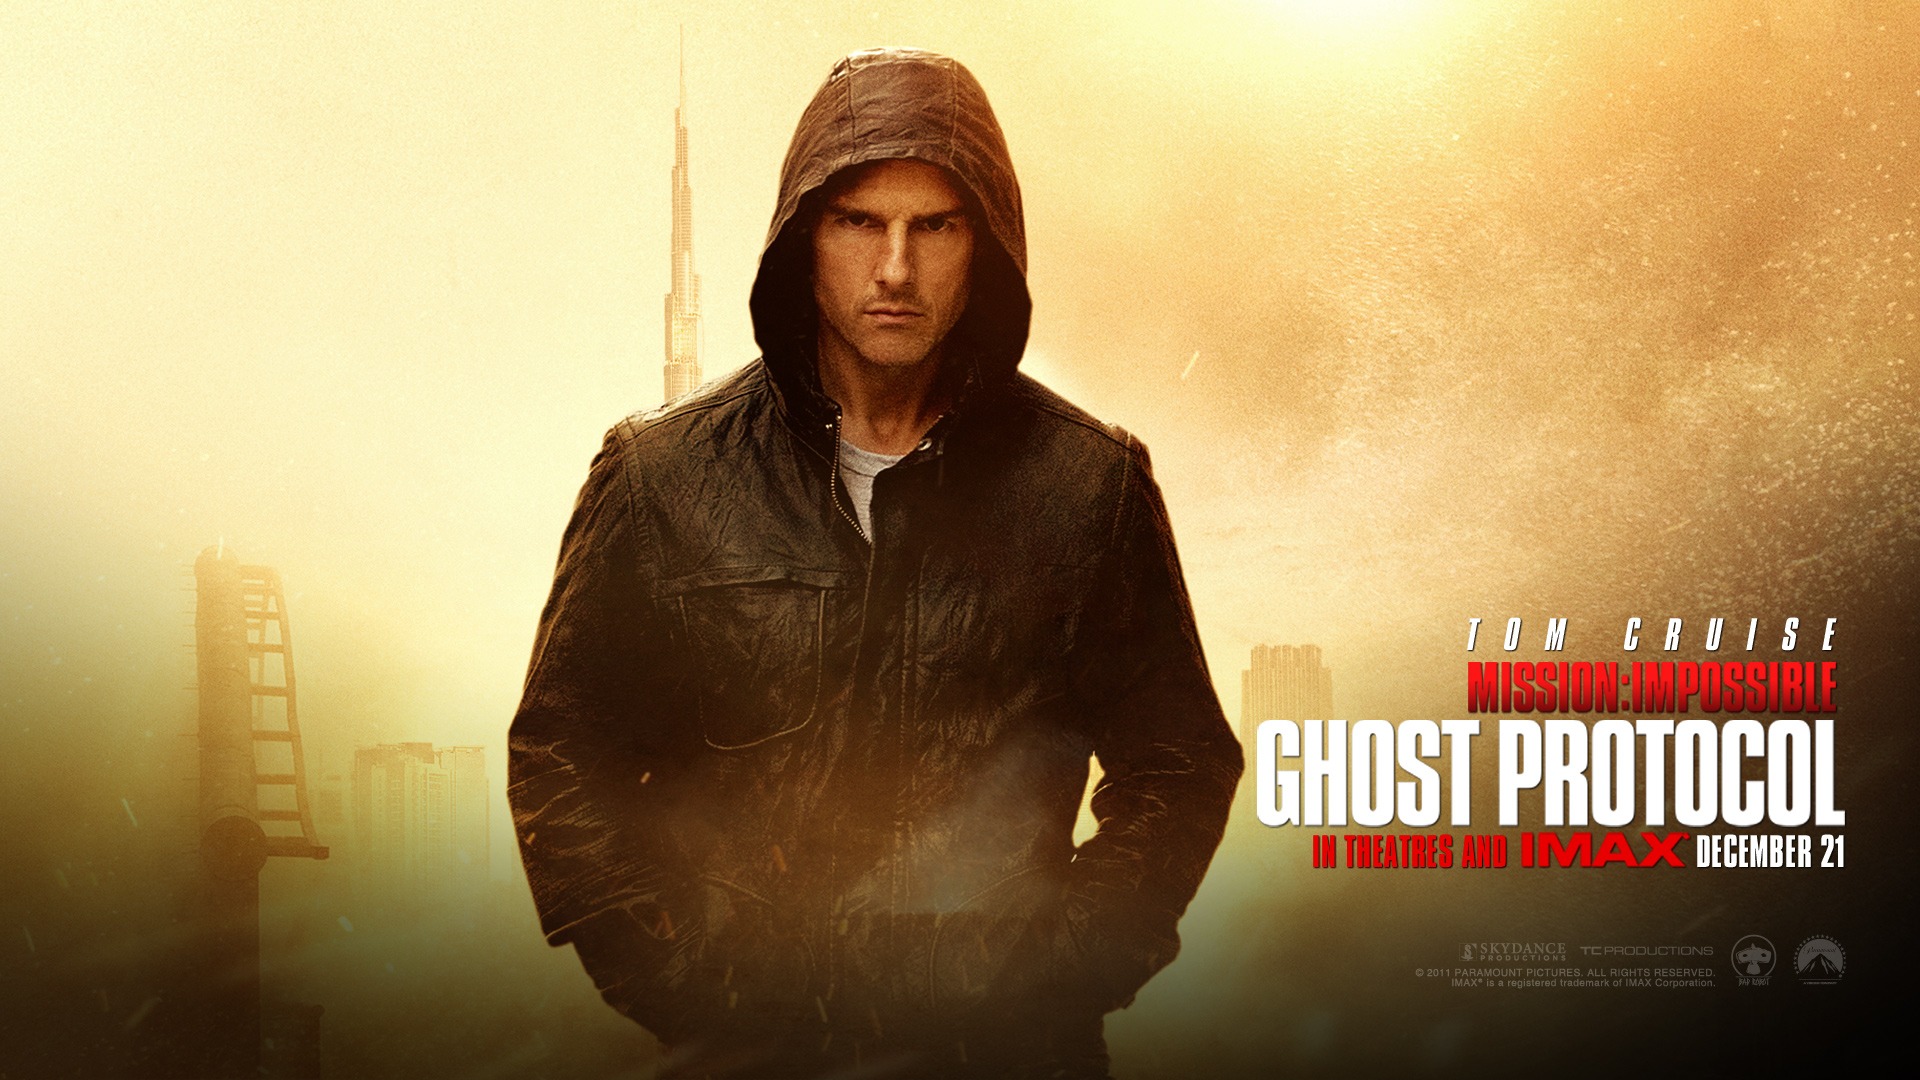 Mission: Impossible - Ghost Protocol 碟中谍4 高清壁纸9 - 1920x1080